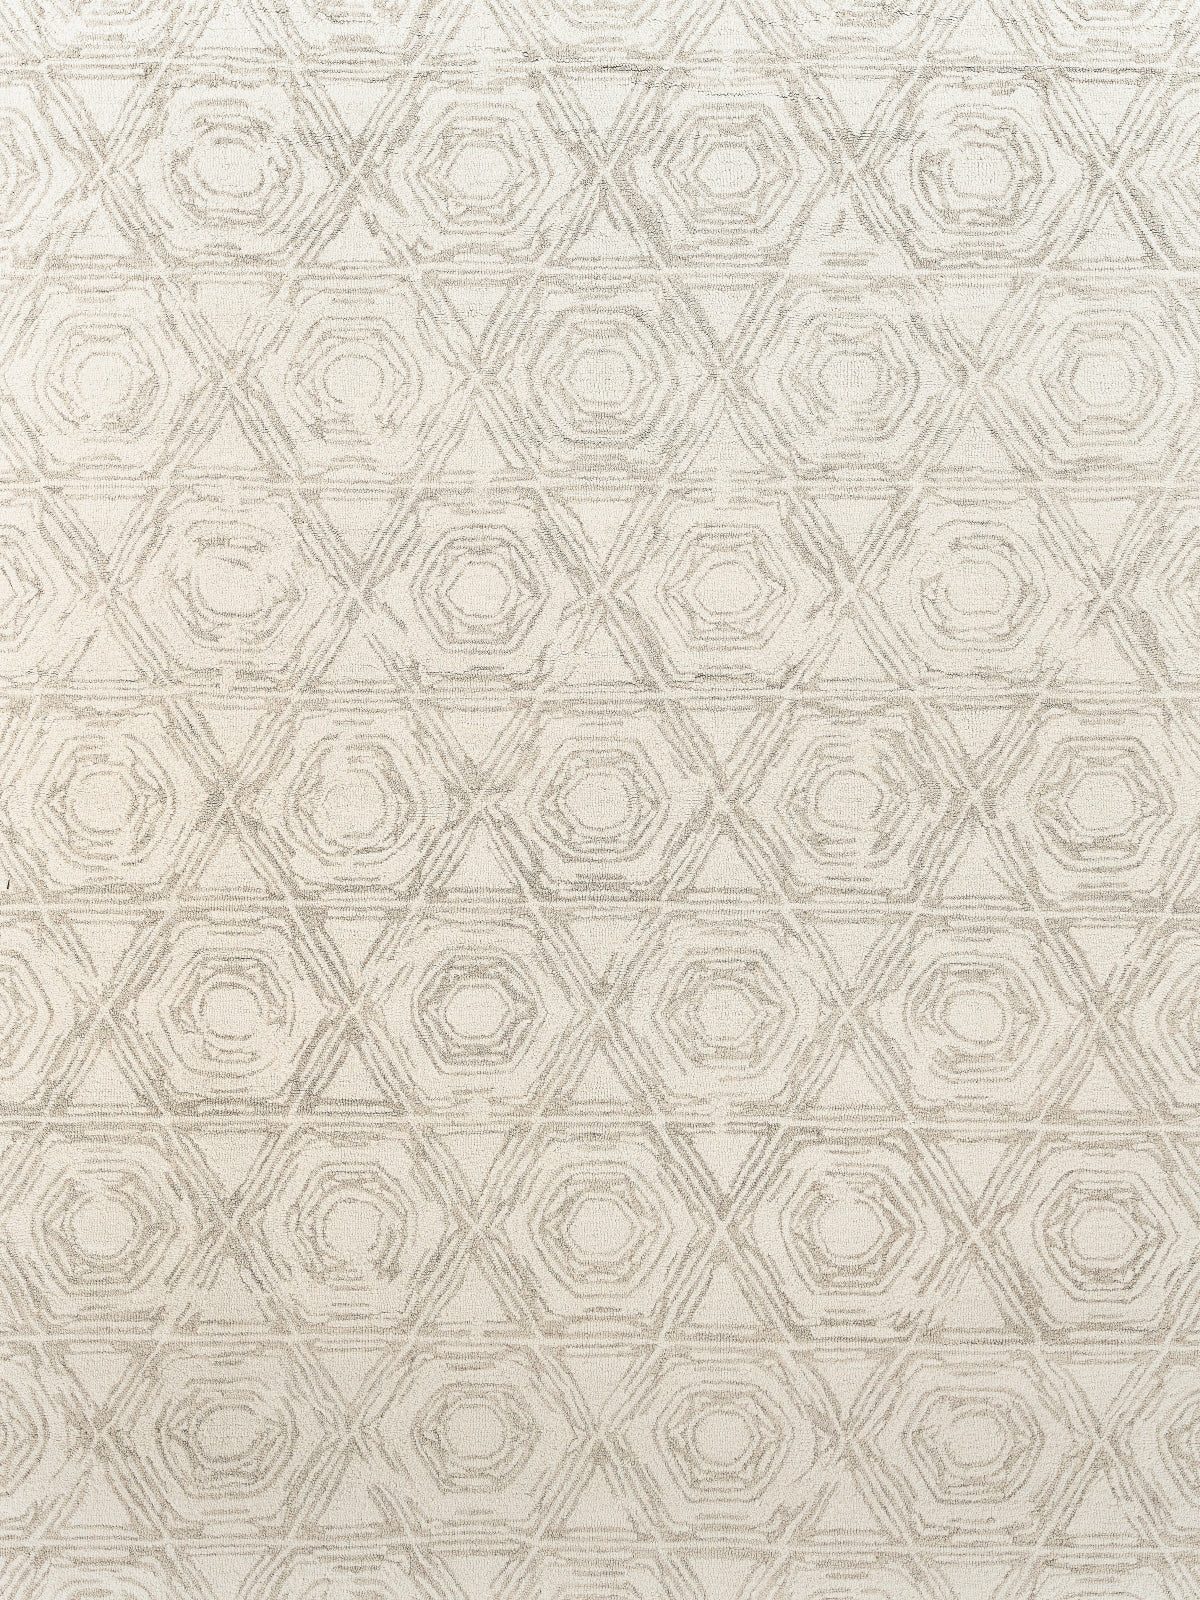 Exquisite Rugs Caprice 2707 Silver/Ivory Area Rug